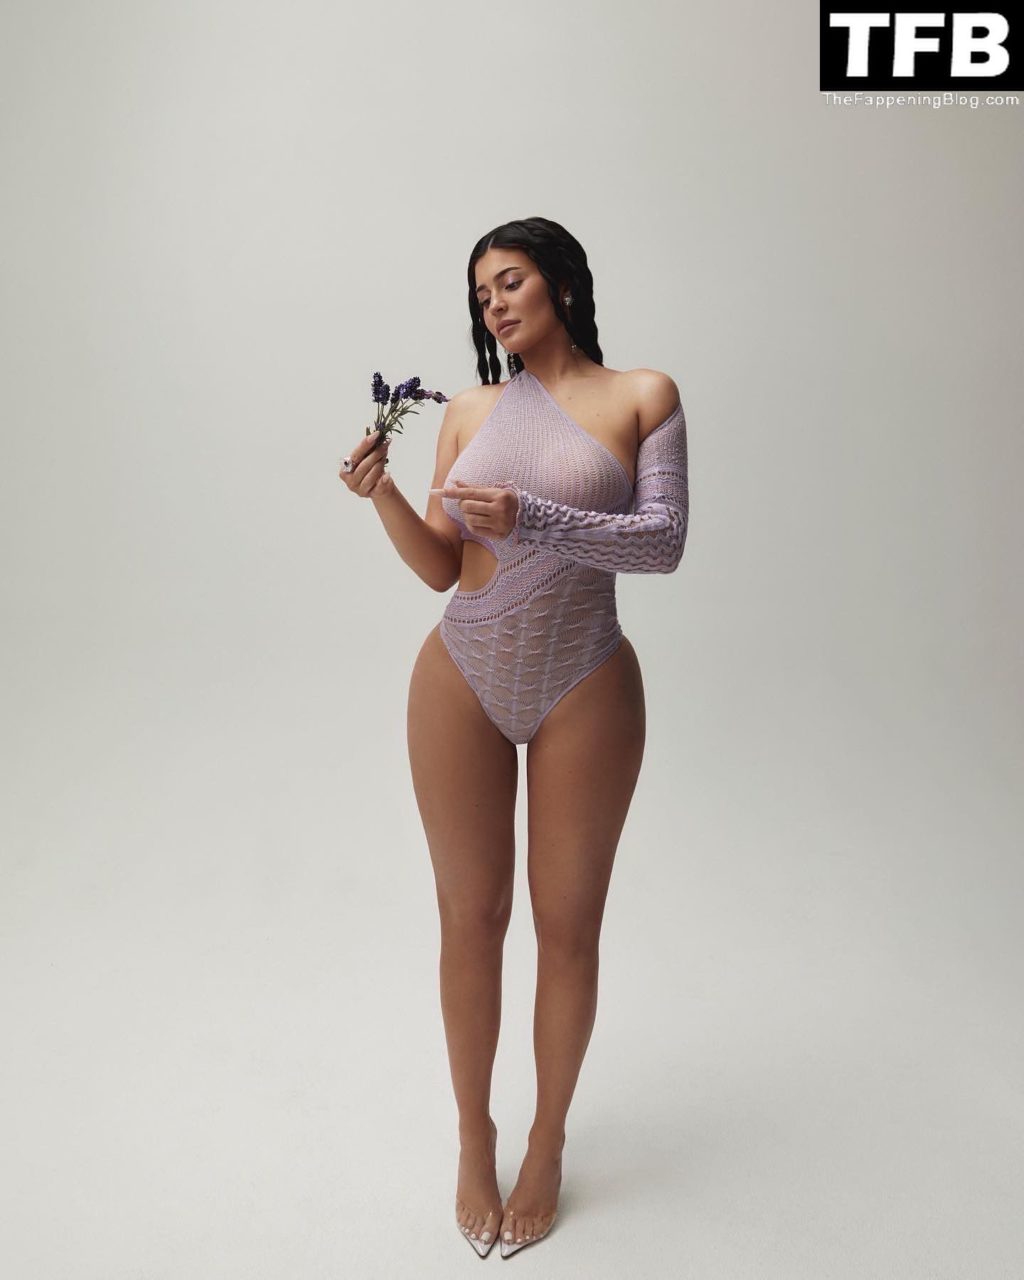 Kylie Jenner Gorgeous Curves 4 thefappeningblog.com  1024x1280 - Kylie Jenner Promotes Her Kylie Skin Collection in a Sexy Shoot (13 Photos)